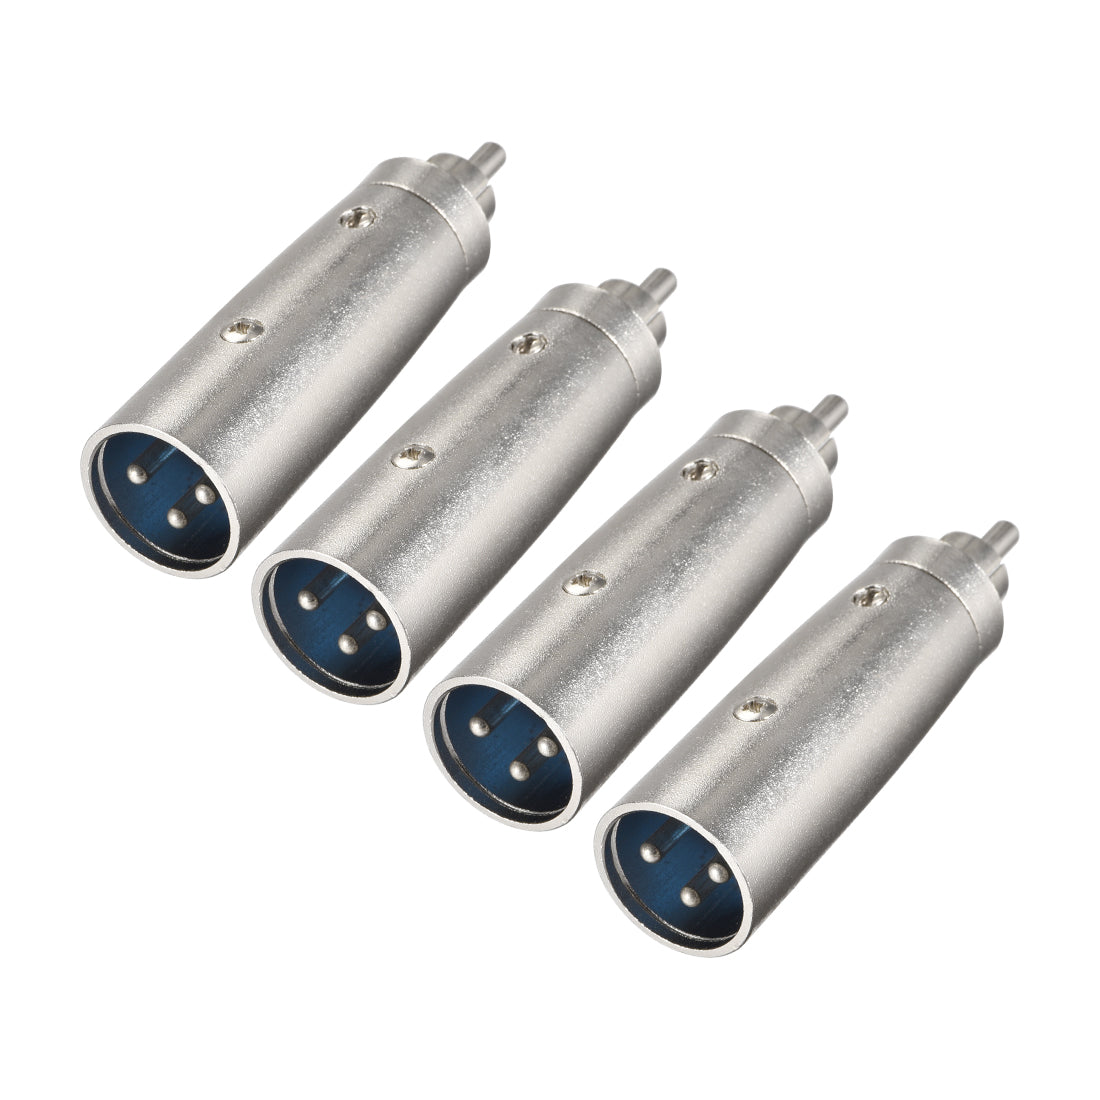 uxcell Uxcell XLR Male to RCA Male Adapter,Gender Changer - 3 Pin XLR-M to RCA-M Converter,Microphones Plug-In Audio Adapter Connector,Mic Male Plug,4pcs